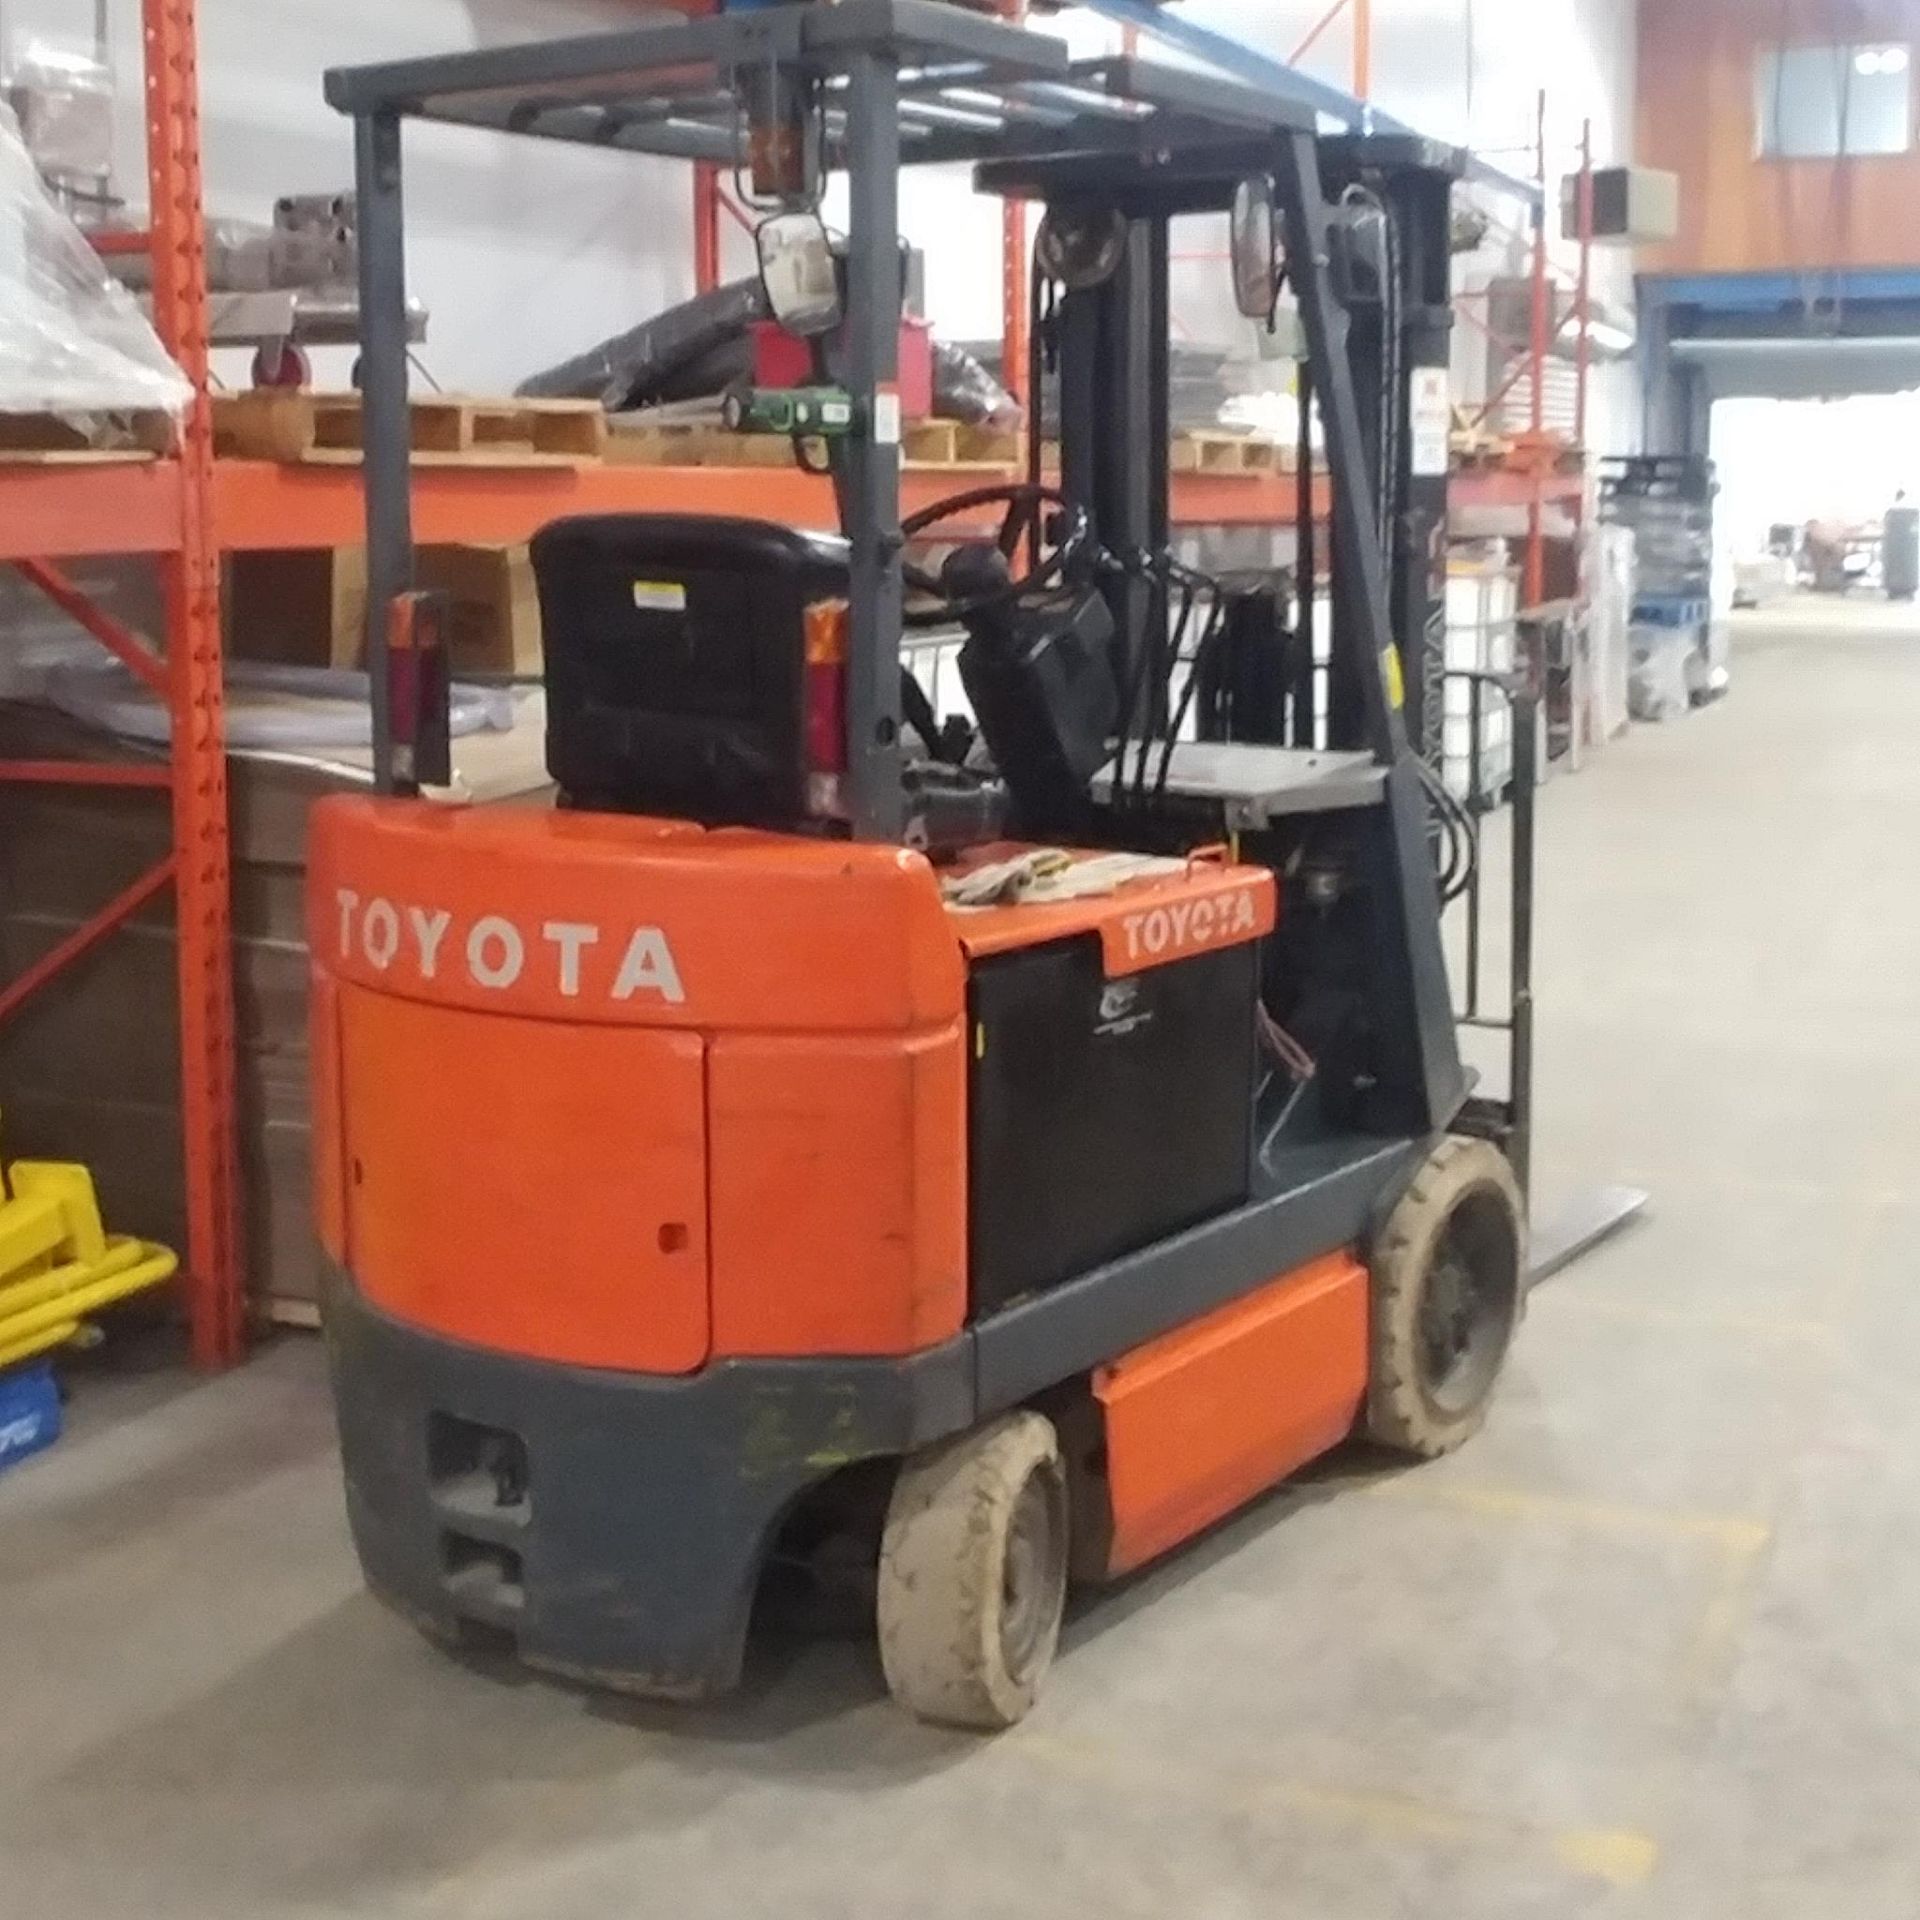 Toyota Electric Forklift Truck - 3 Stage - c/w chargers - 5000 lb capacity